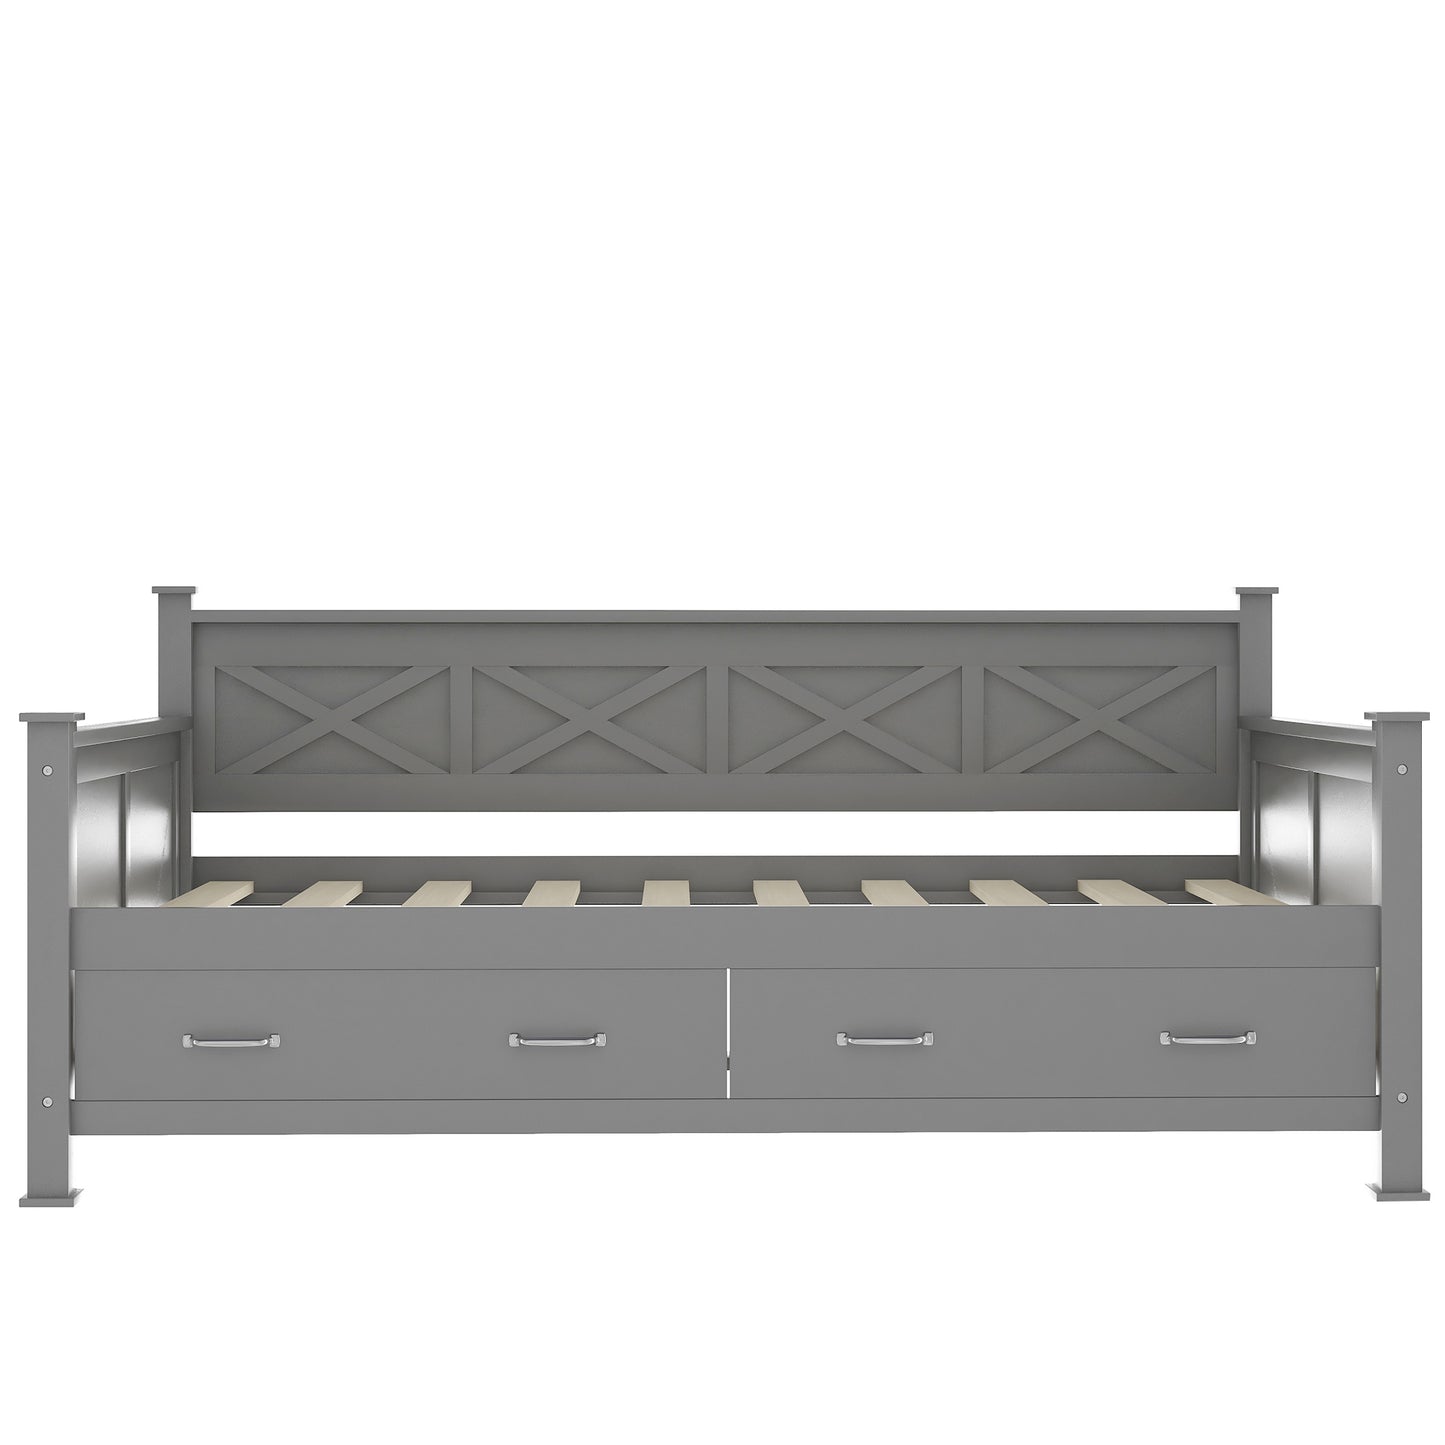 Twin Size Daybed with 2 Large Drawers, X-shaped Frame, Modern and Rustic Casual Style Daybed, Gray